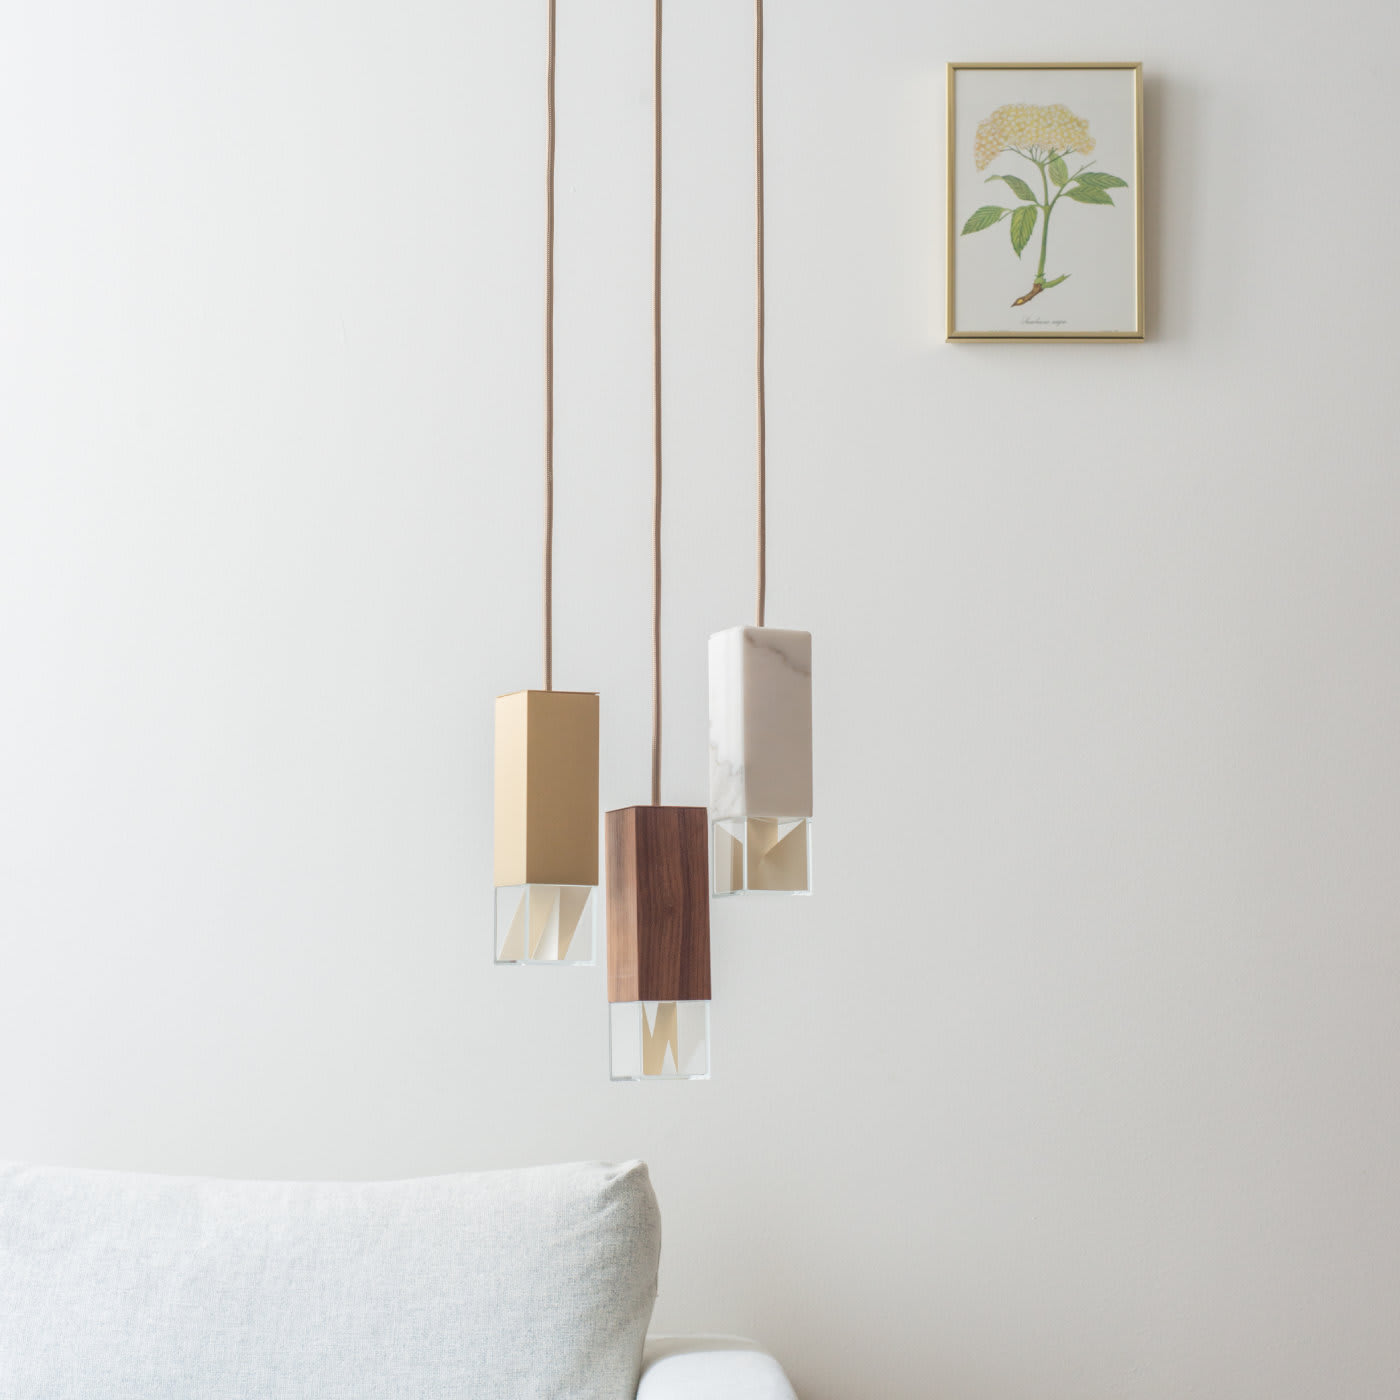 Lamp/One Collection Chandelier - Formaminima